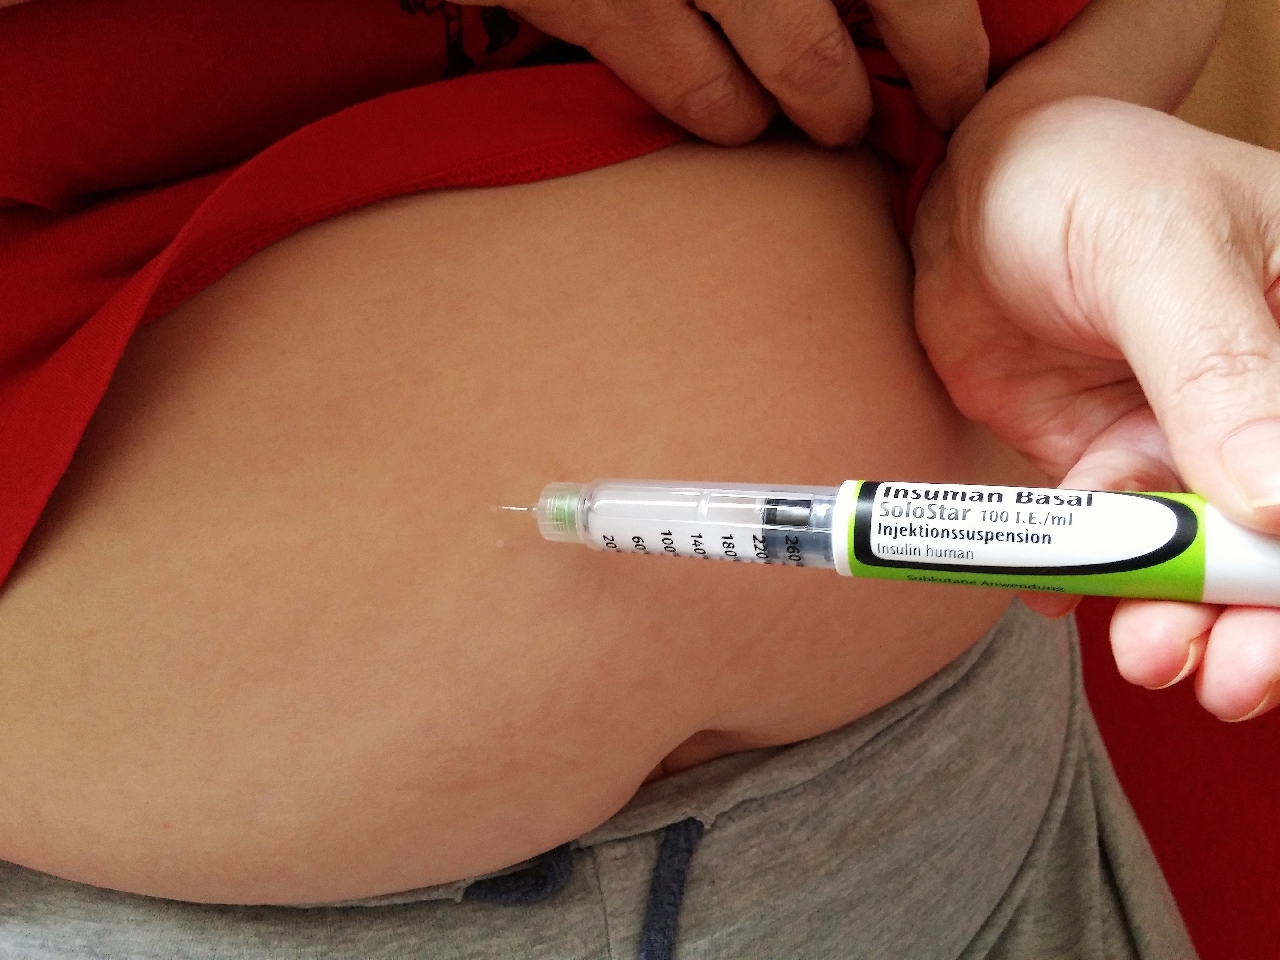 needle being given in the thigh